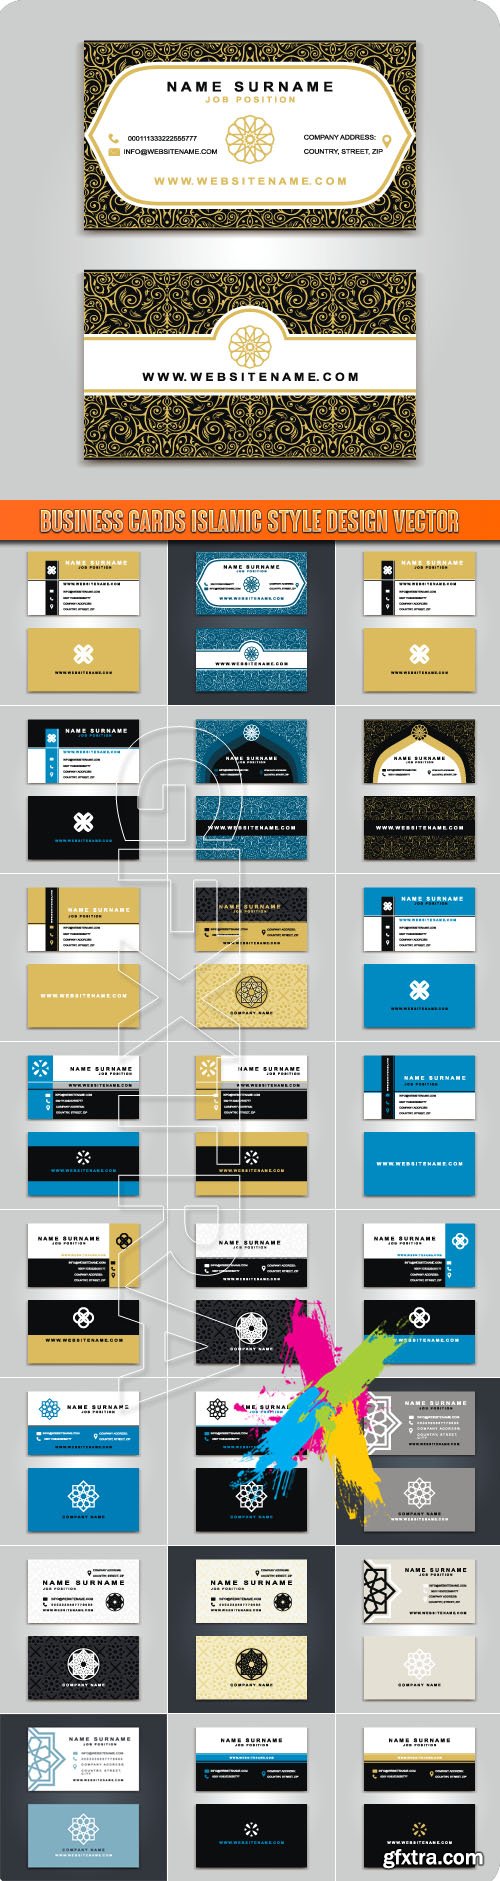 Business Cards Islamic style Design Vector